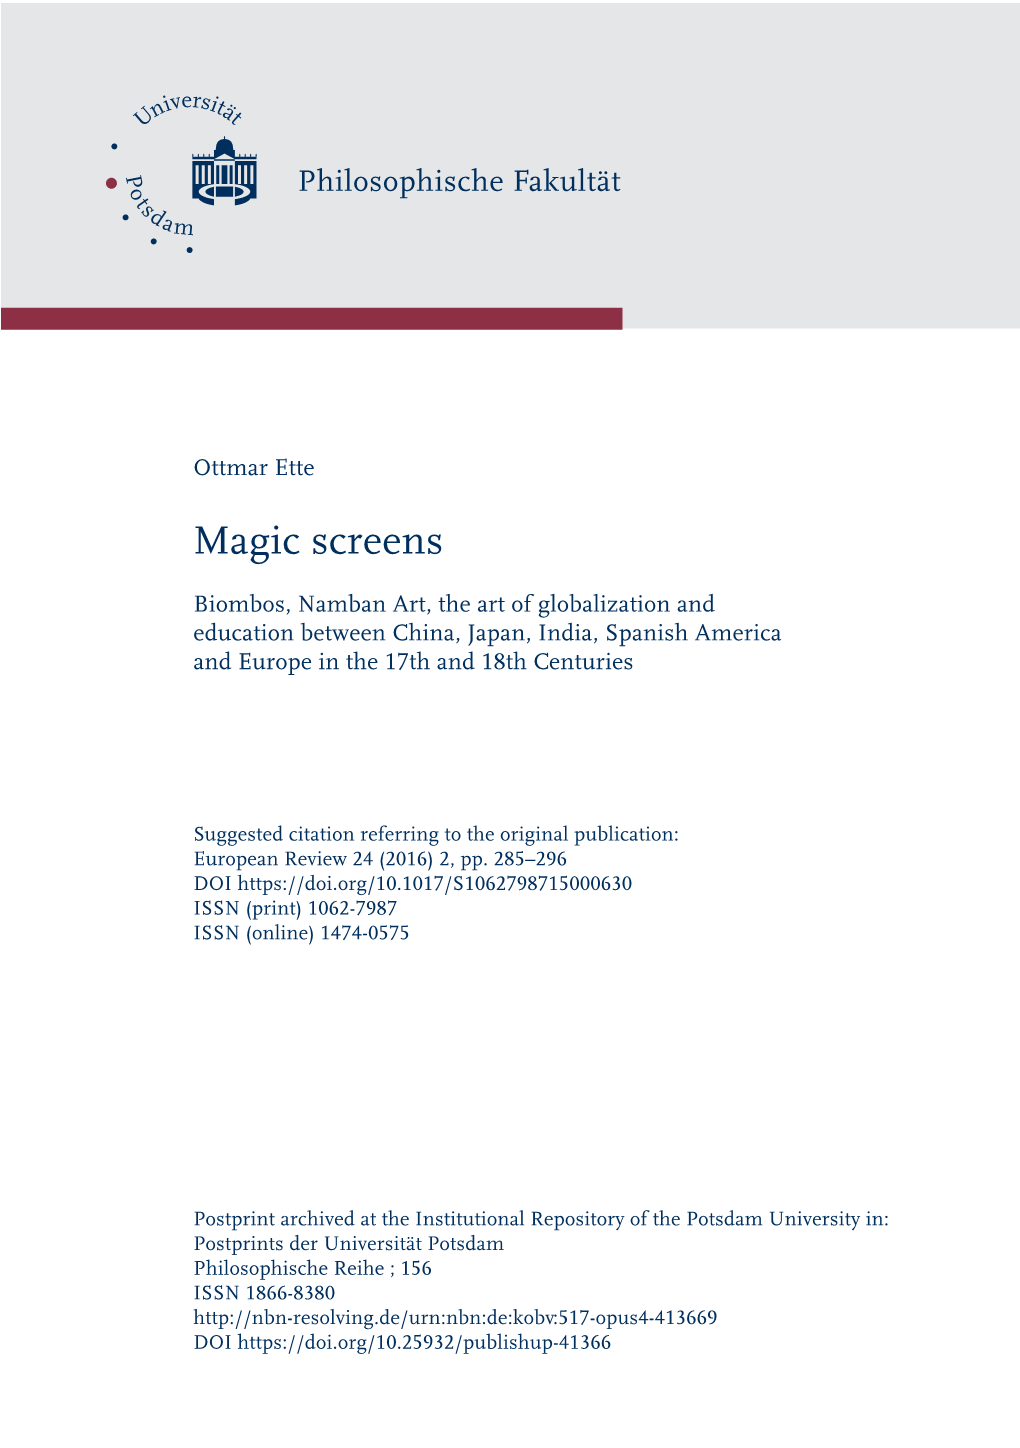 Magic Screens. Biombos, Namban Art, the Art of Globalization and Education Between China, Japan, India, Spanish America and Europe in the 17Th and 18Th Centuries